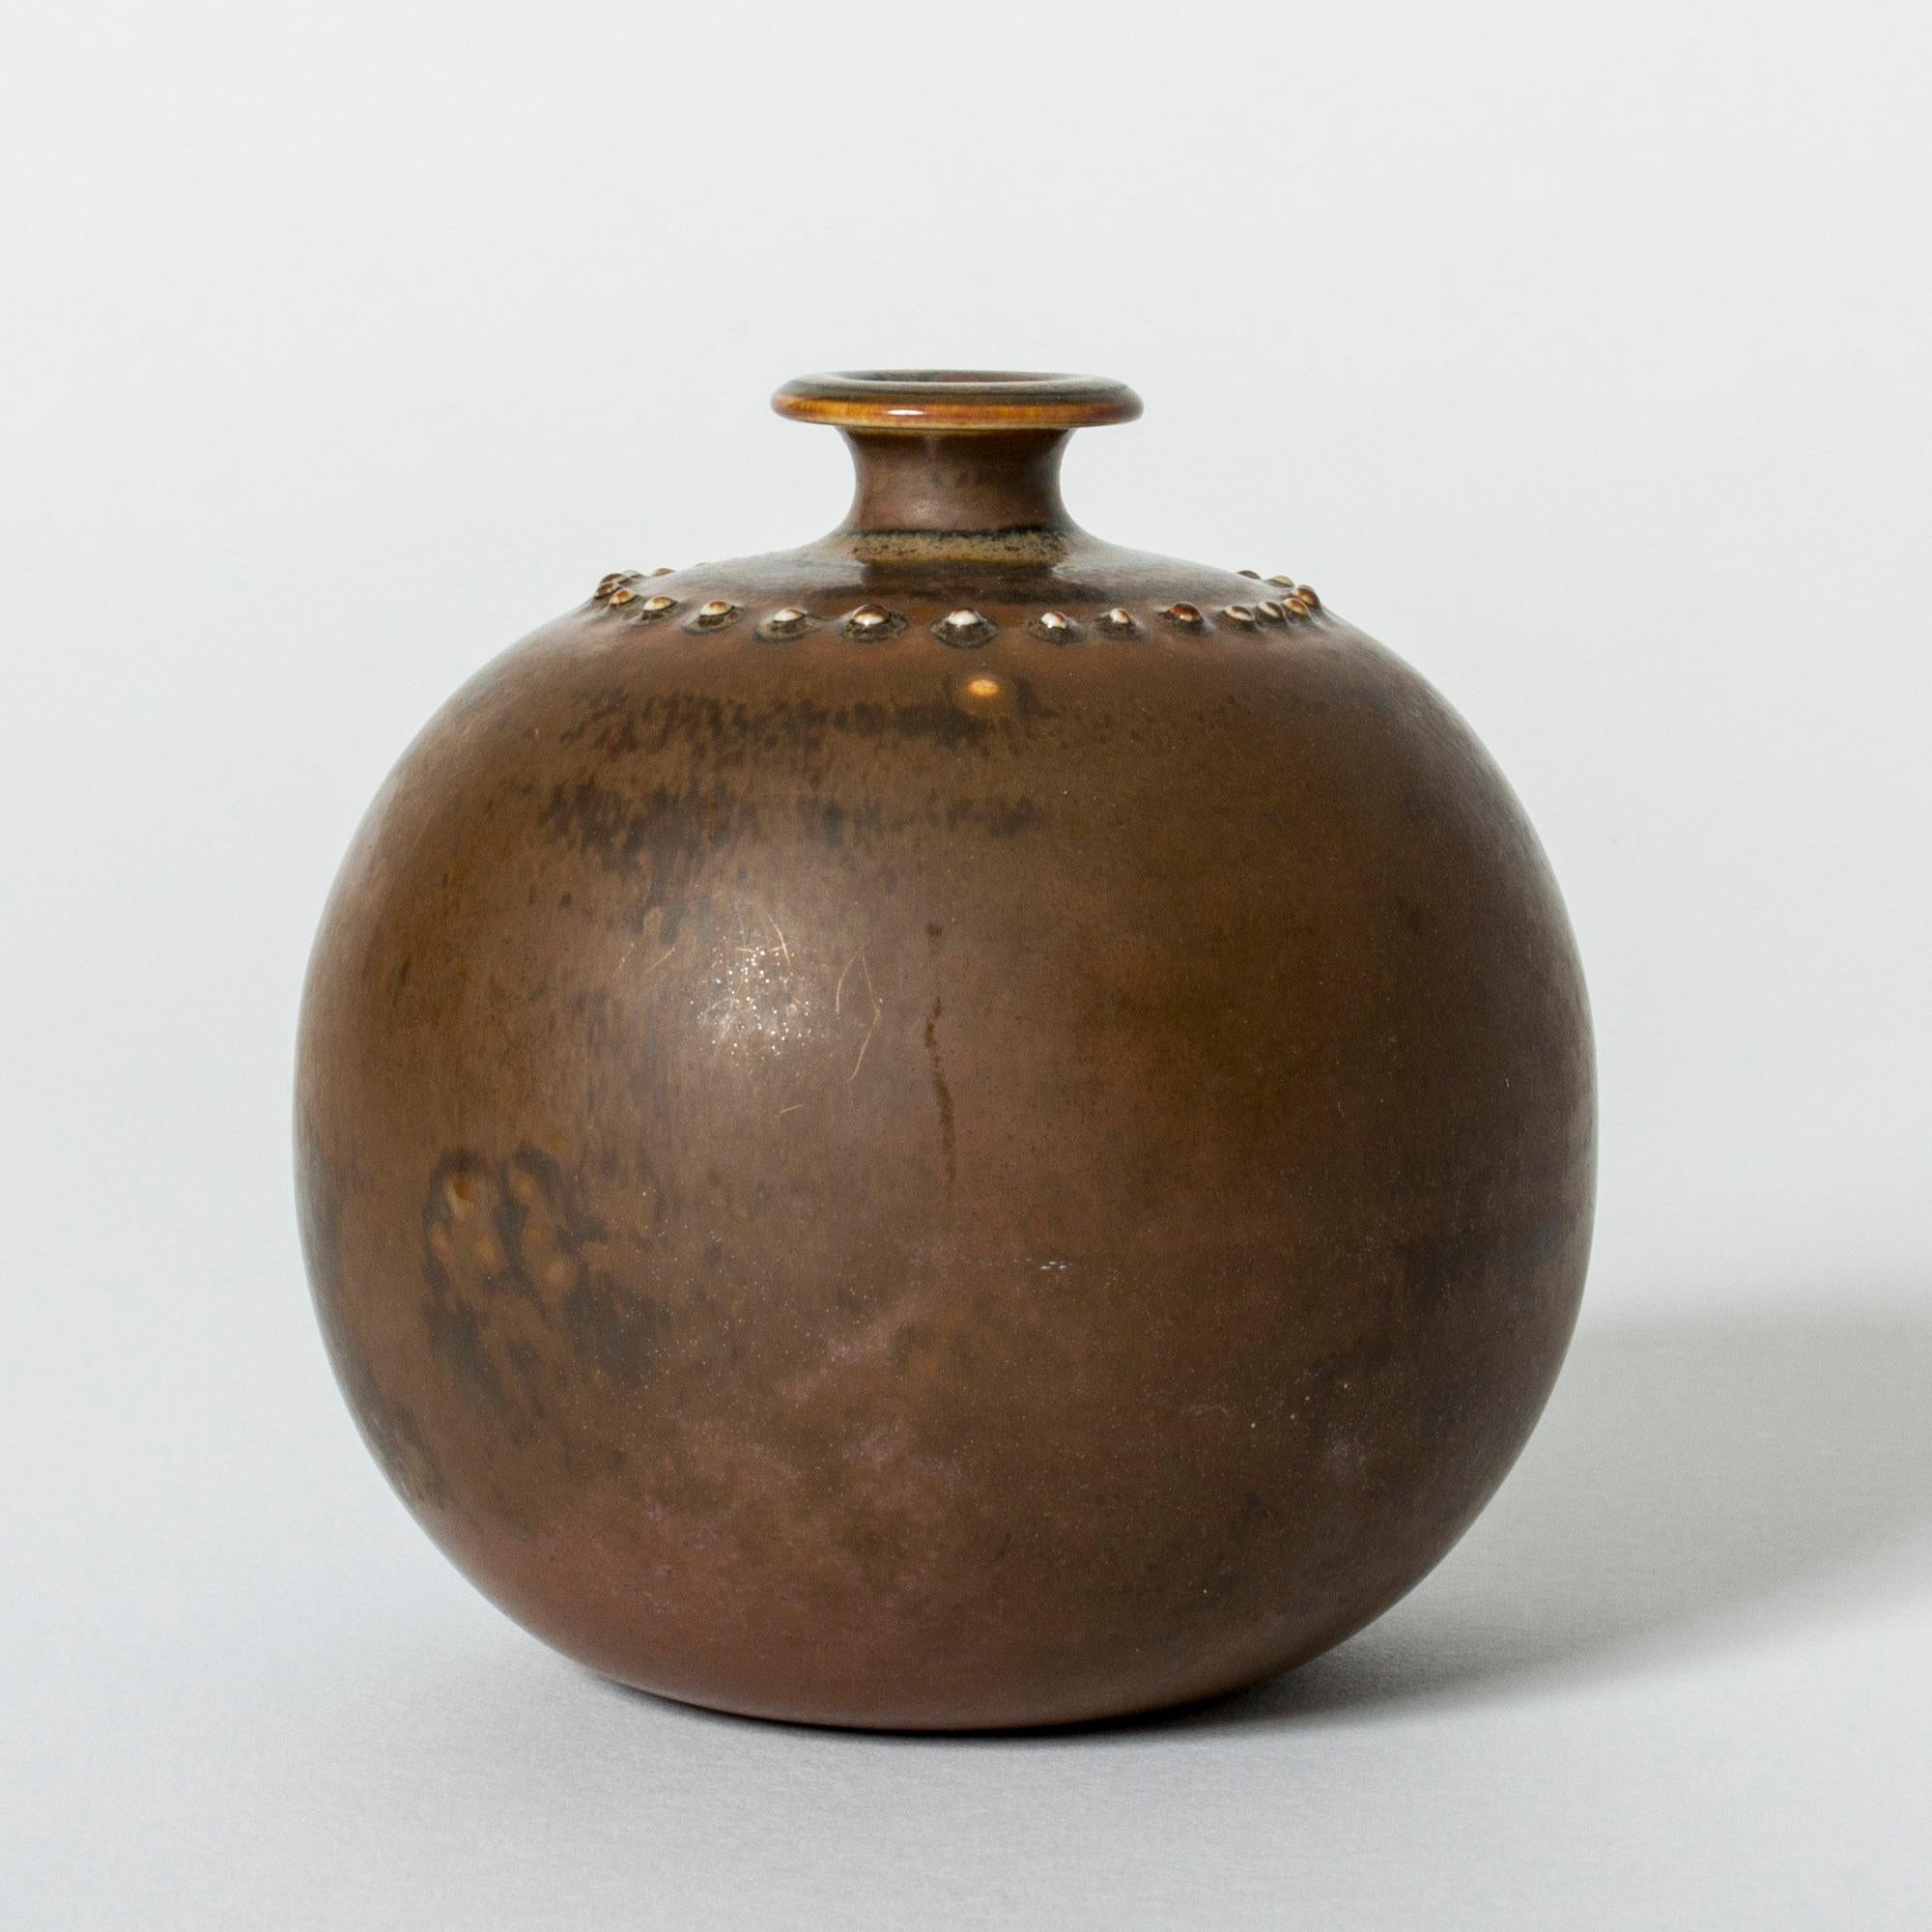 Cute stoneware vase by Stig Lindberg, in a plump design. Decor of spheres around the mouth. Brown glaze in lighter and darker hues.